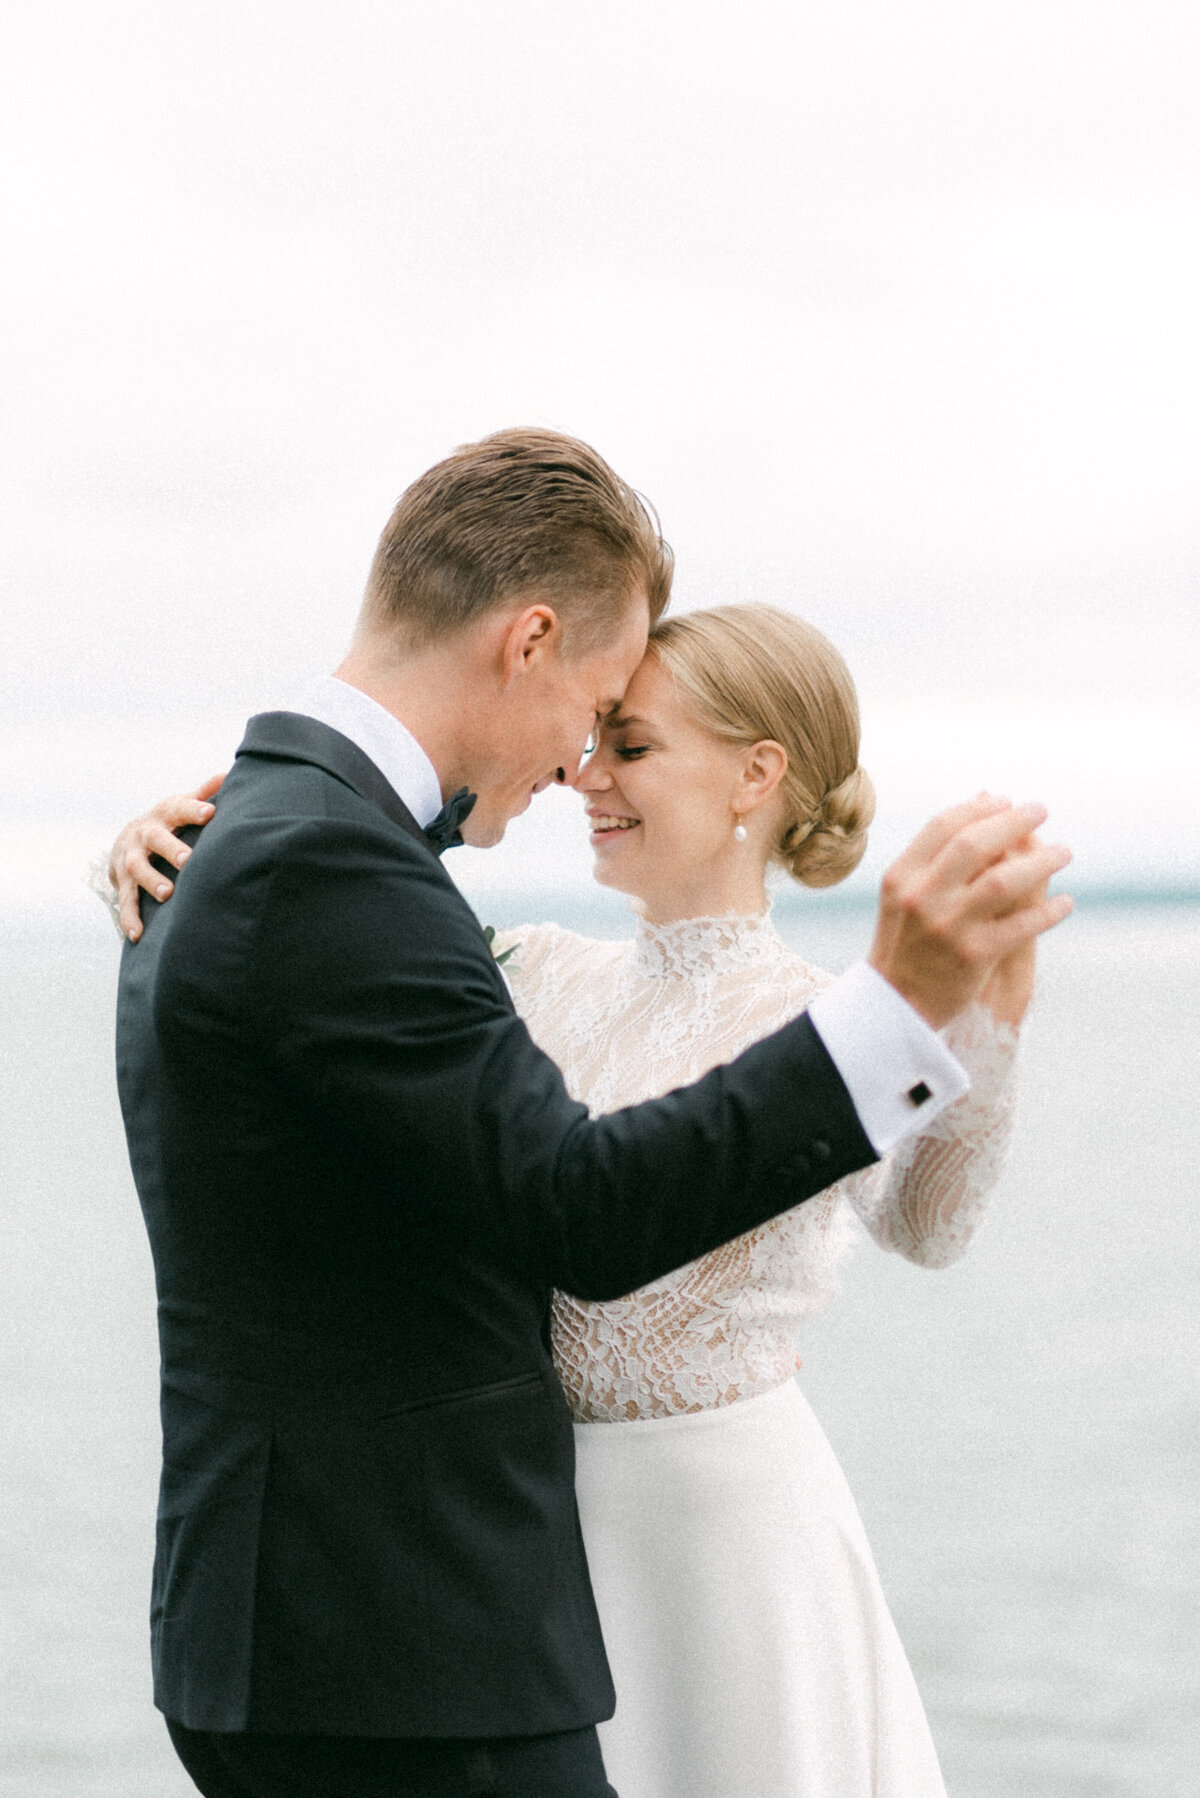 A wedding couple dancing during their photoshoot with wedding photographer Hannika Gabrielsson.